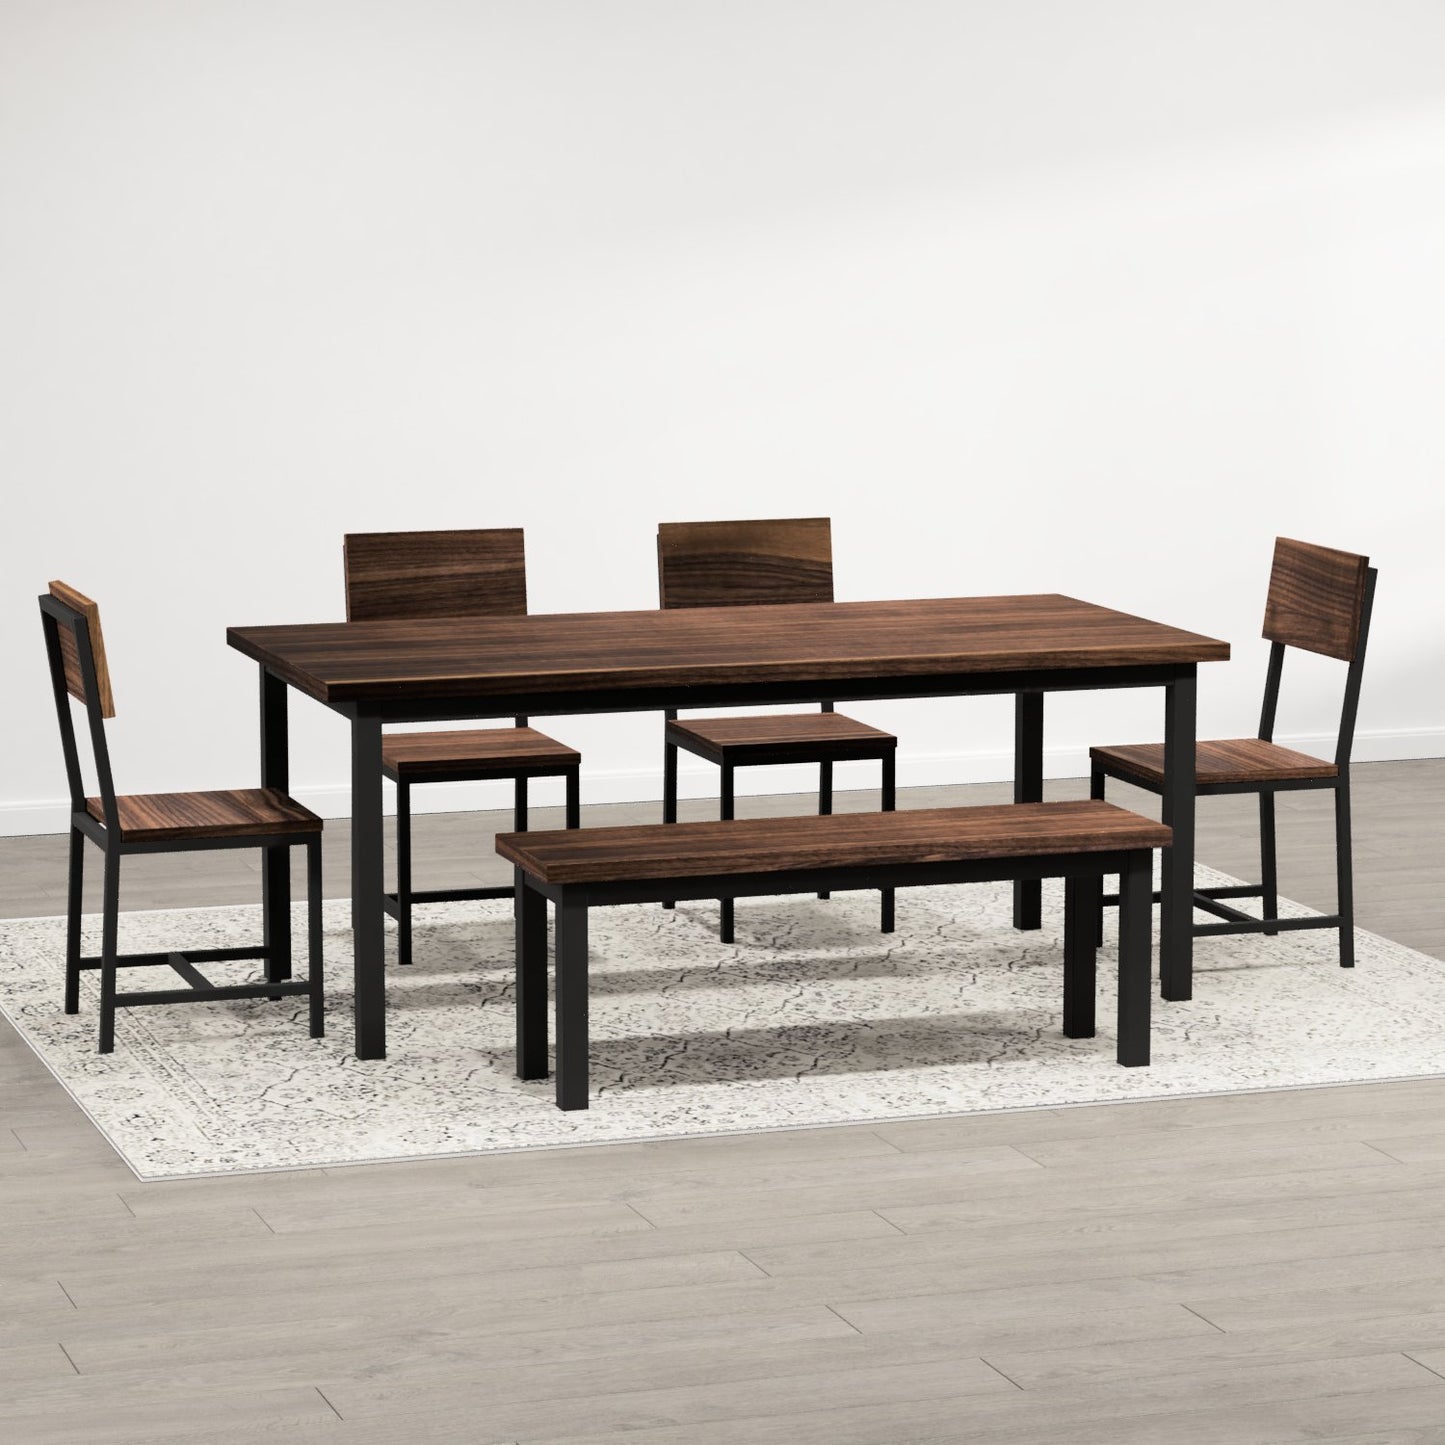 The Frontier Dining Table - FargoWoodworks